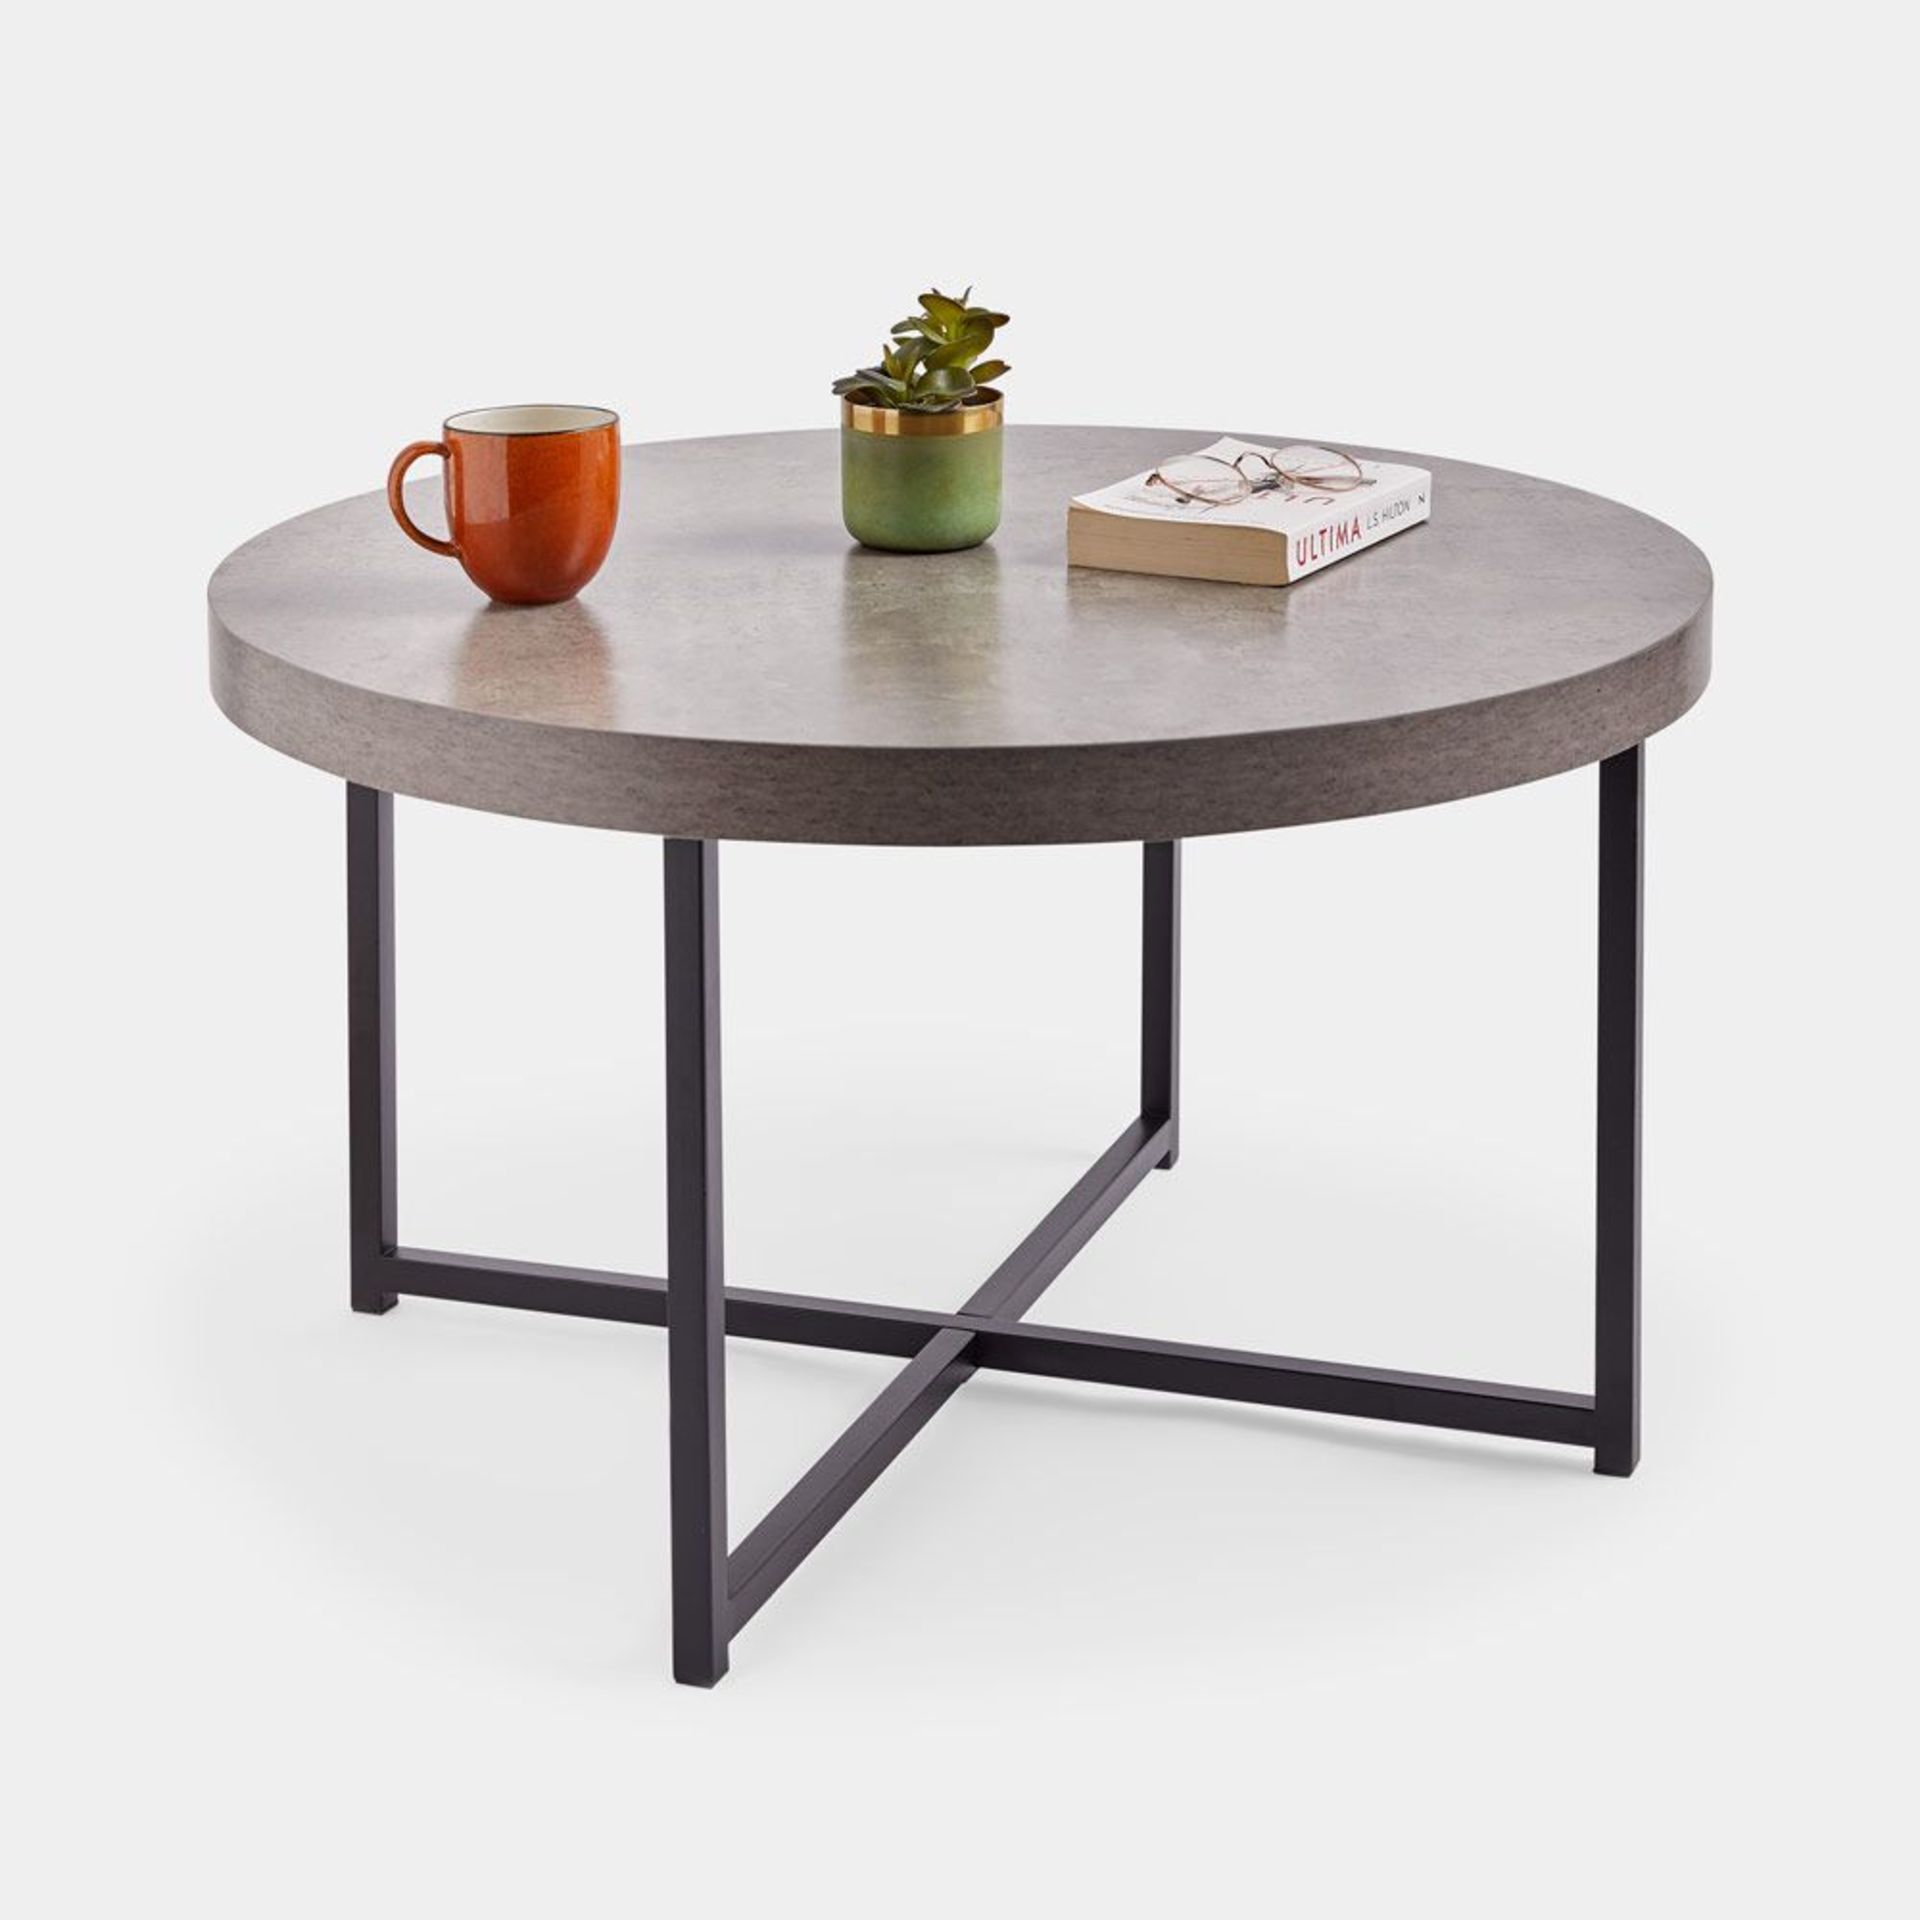 Concrete Effect Coffee Table. - BI. Industrial, urban style with lightweight construction – this